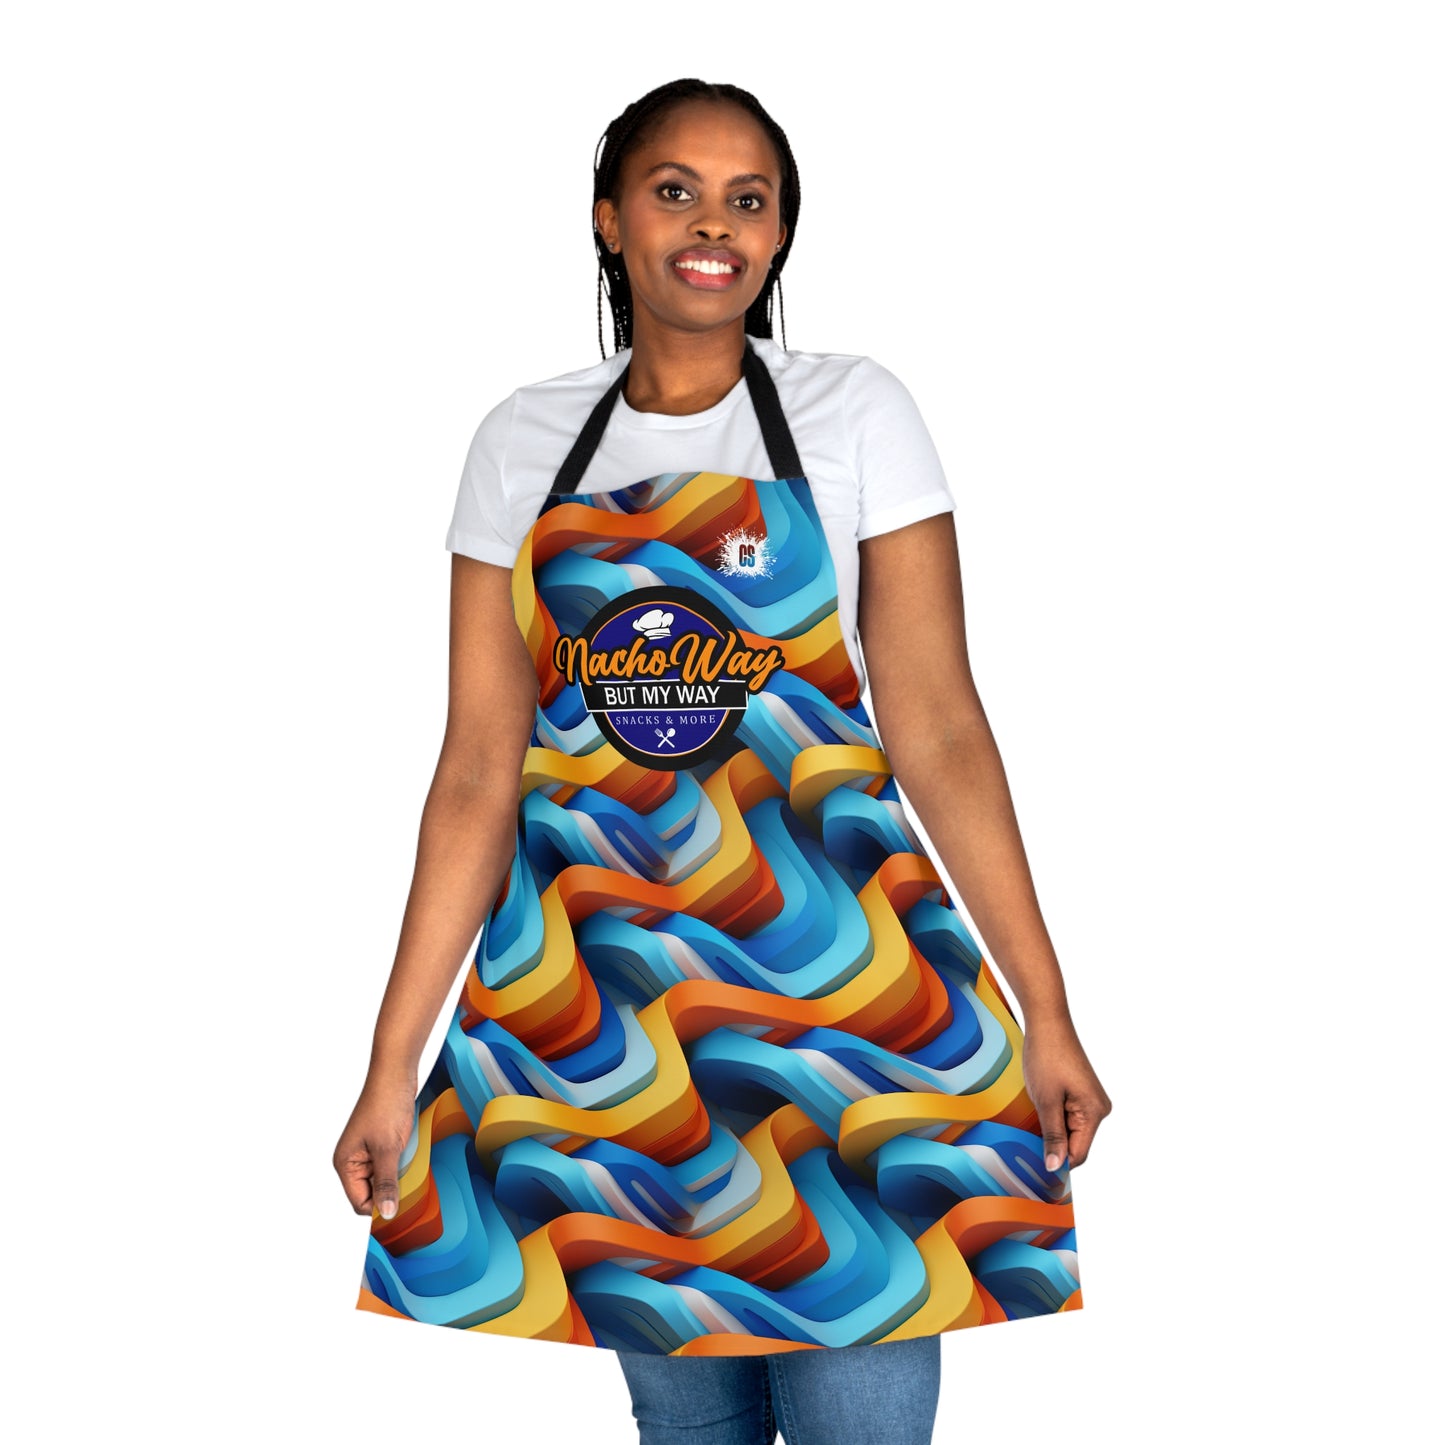 NachoWay “Go With The Flow” Apron